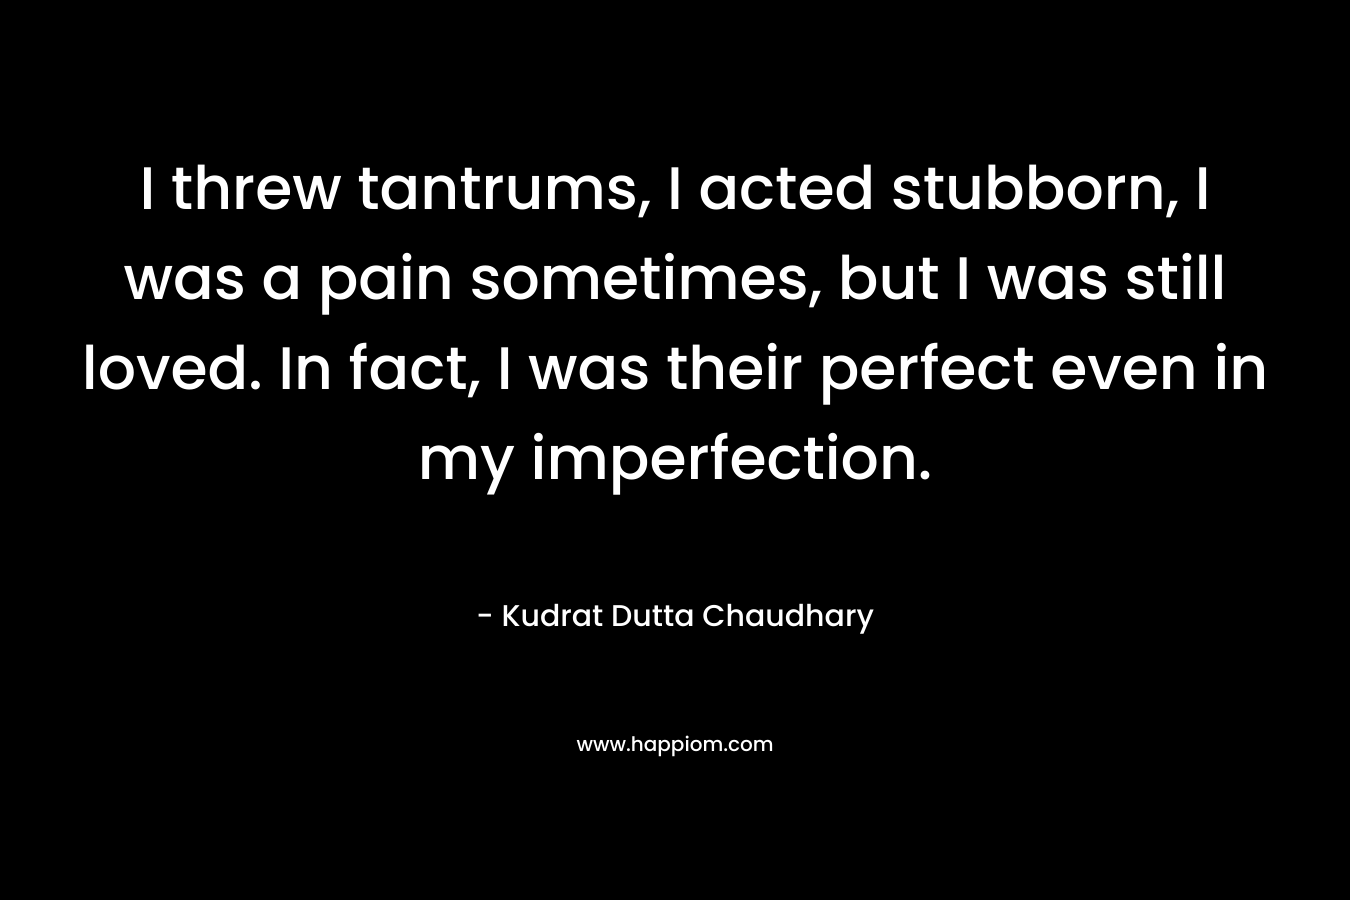 I threw tantrums, I acted stubborn, I was a pain sometimes, but I was still loved. In fact, I was their perfect even in my imperfection.